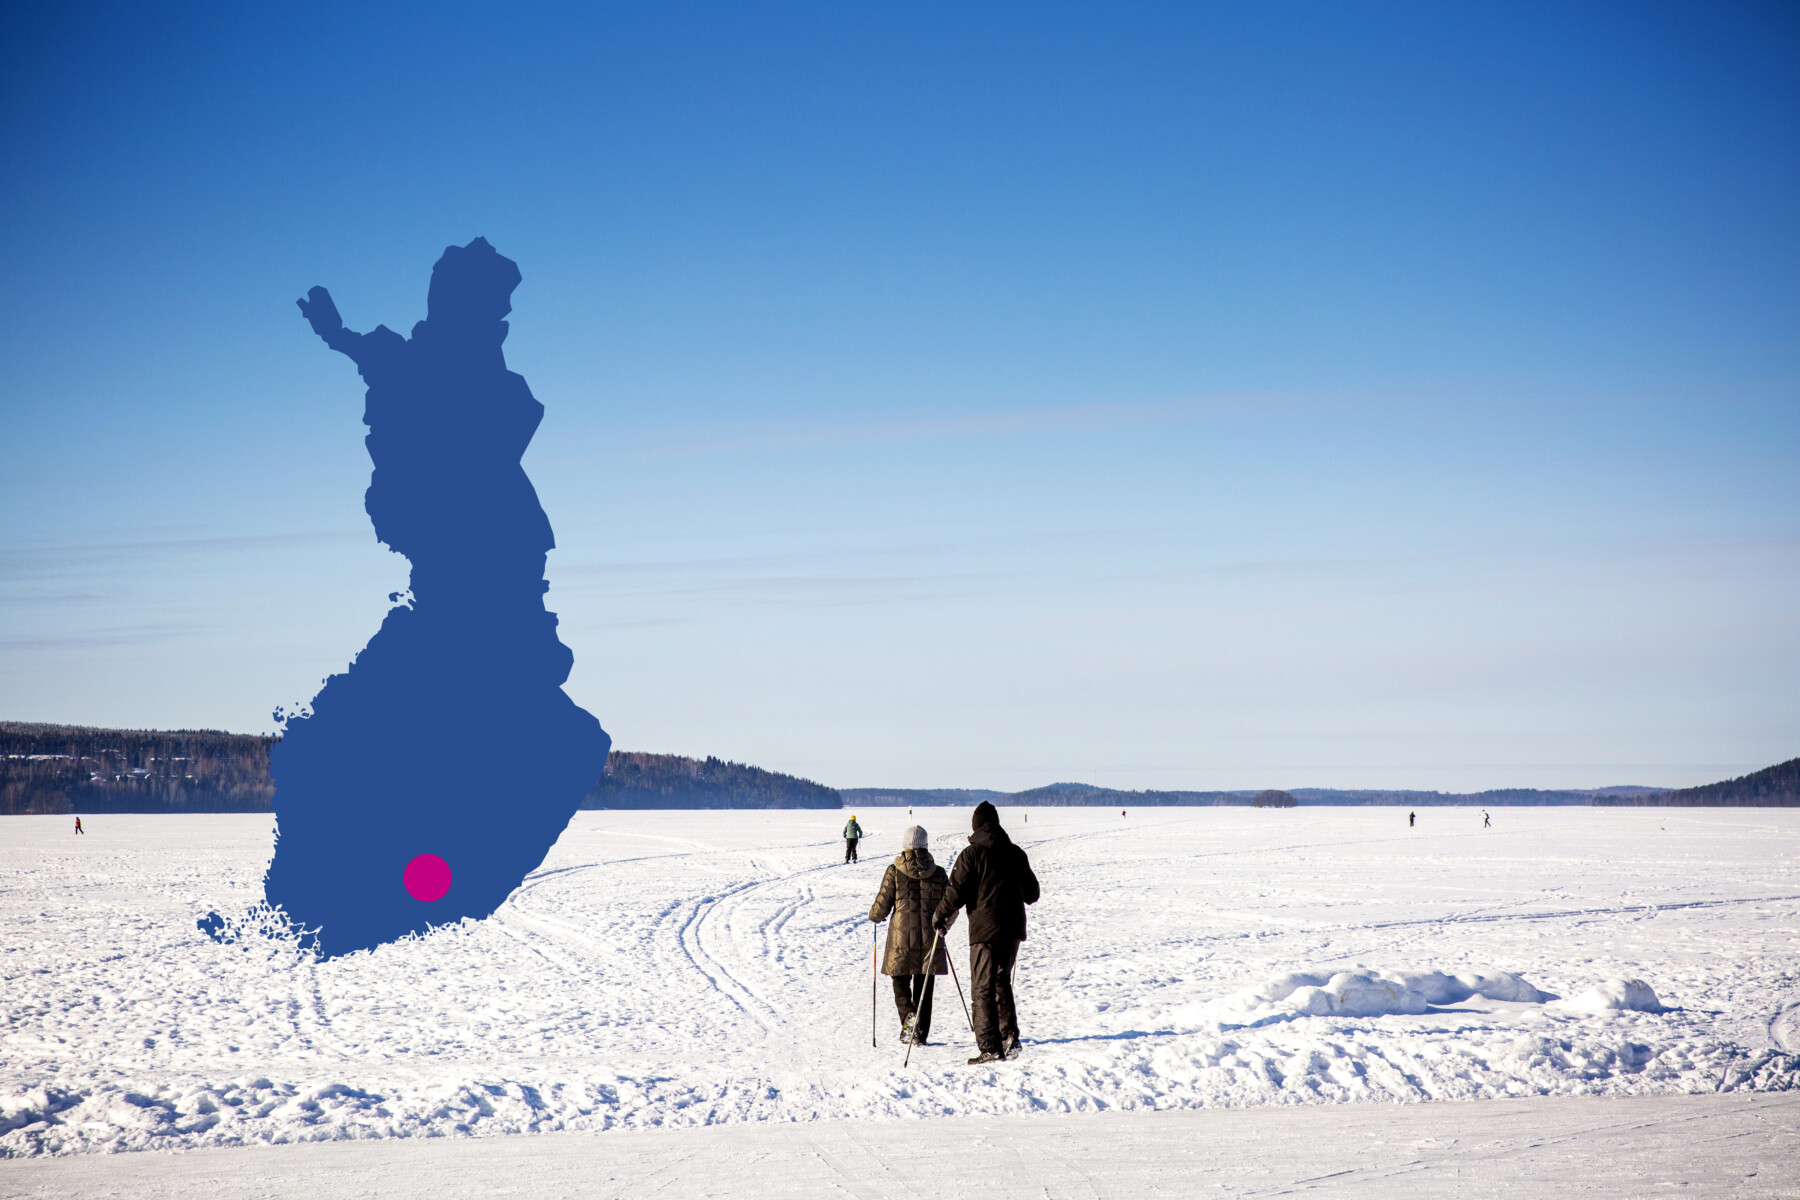 People are cross-country skiing over a frozen lake under a blue sky in Lahti, a city in southern Finland.